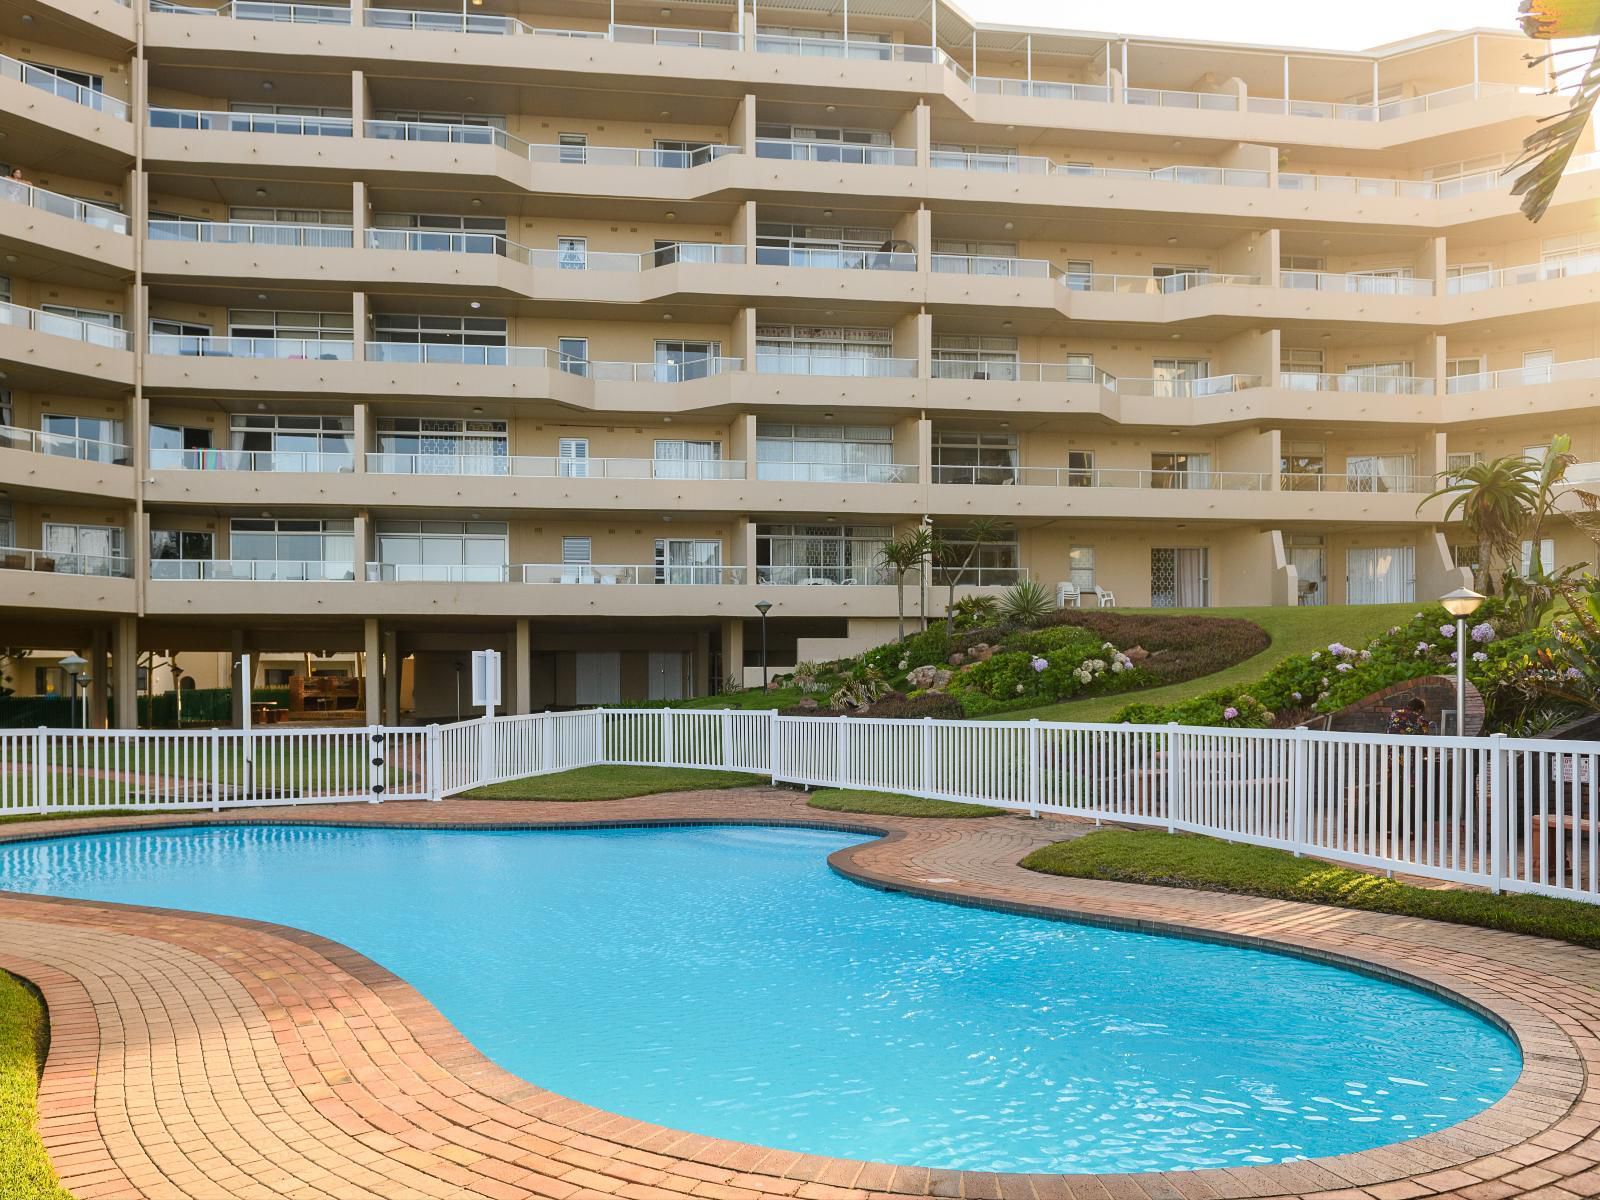 Sands Affordable Luxury On The Beach Ballito Kwazulu Natal South Africa Complementary Colors, Balcony, Architecture, Swimming Pool